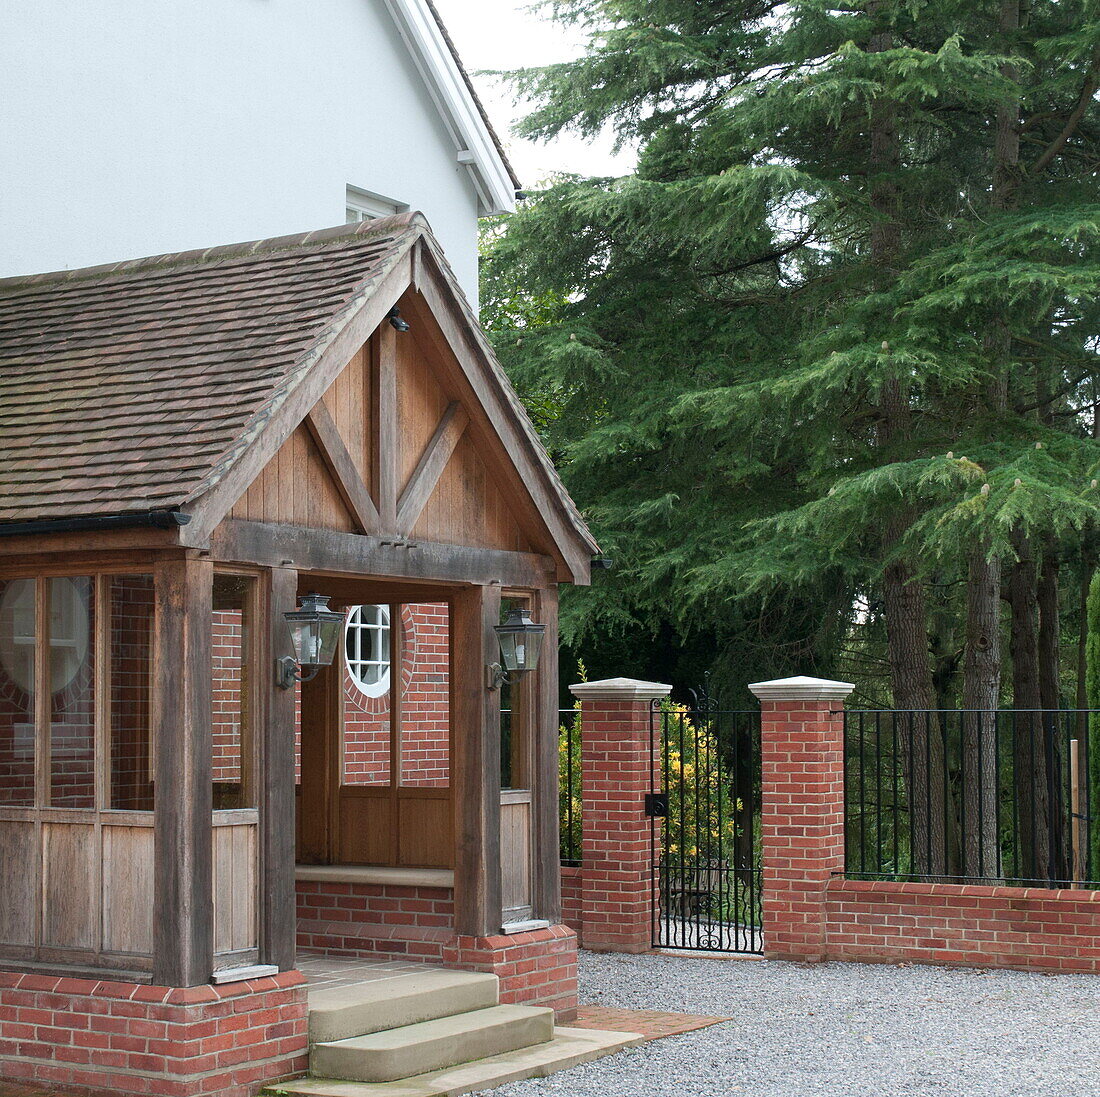 Wooden porch and pine tree with gravel driveway exterior to Haywards Heath home,  West Sussex,  England,  UK